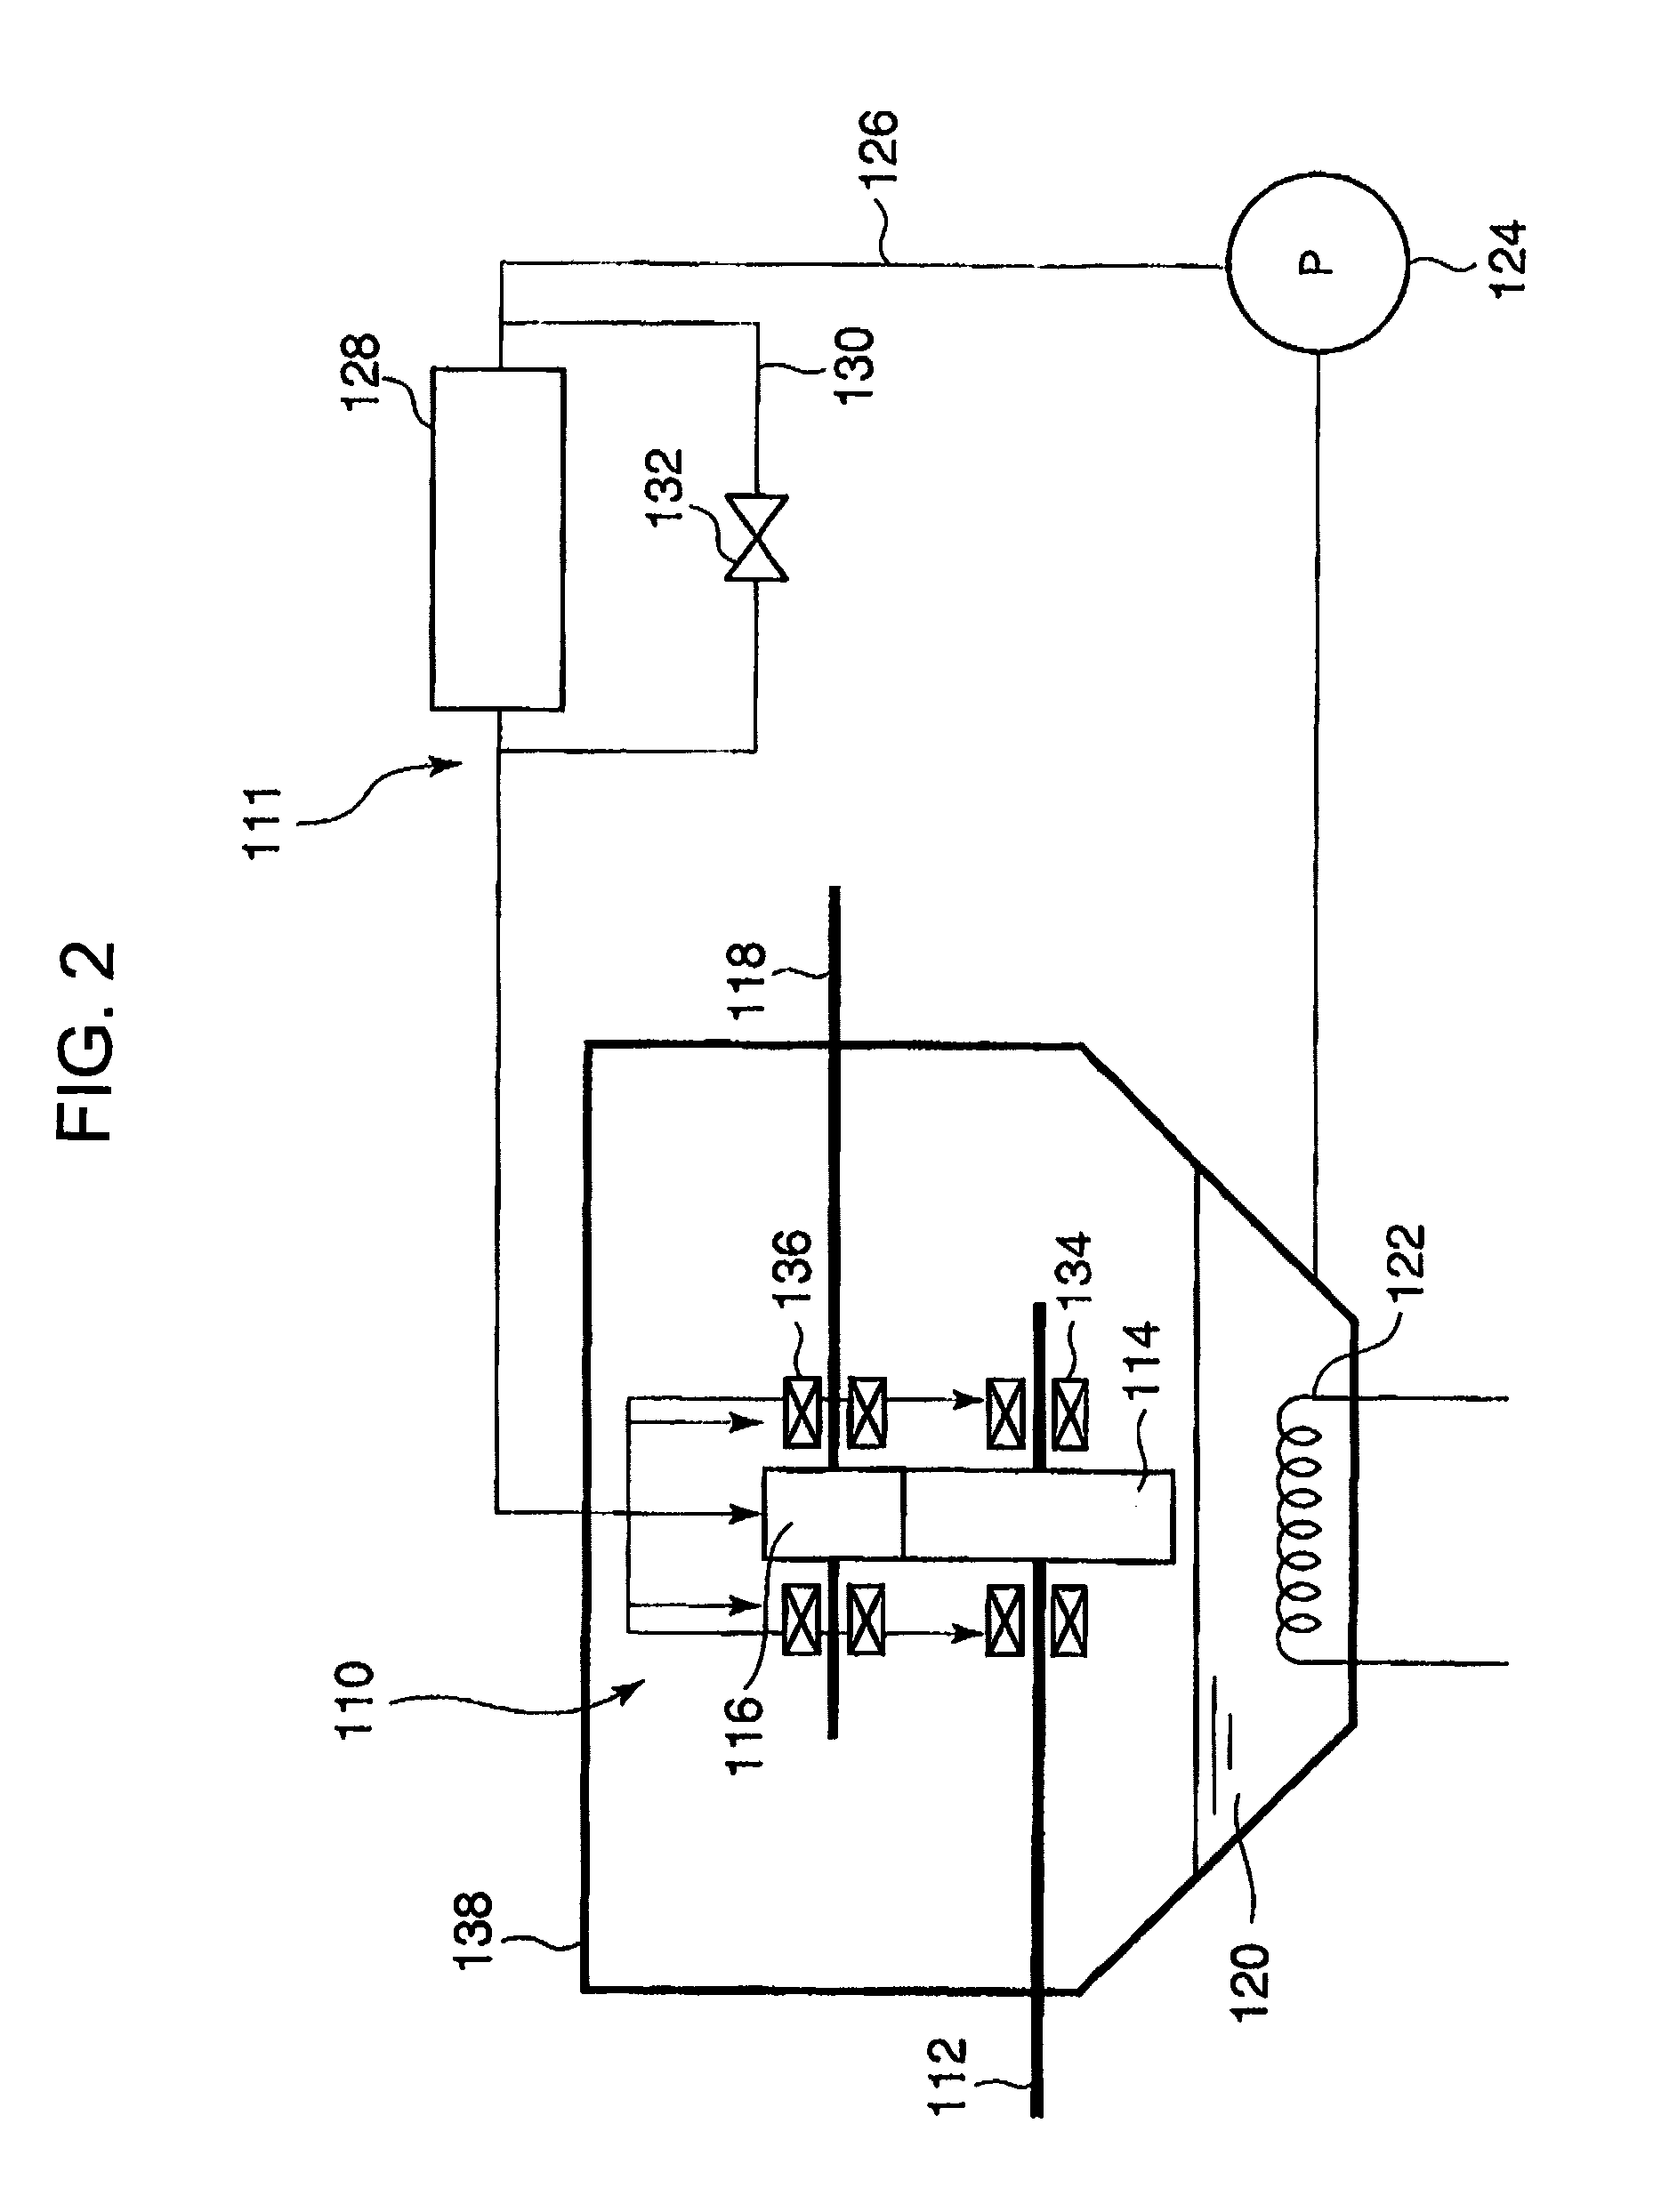 Lubricating device and method for gearbox